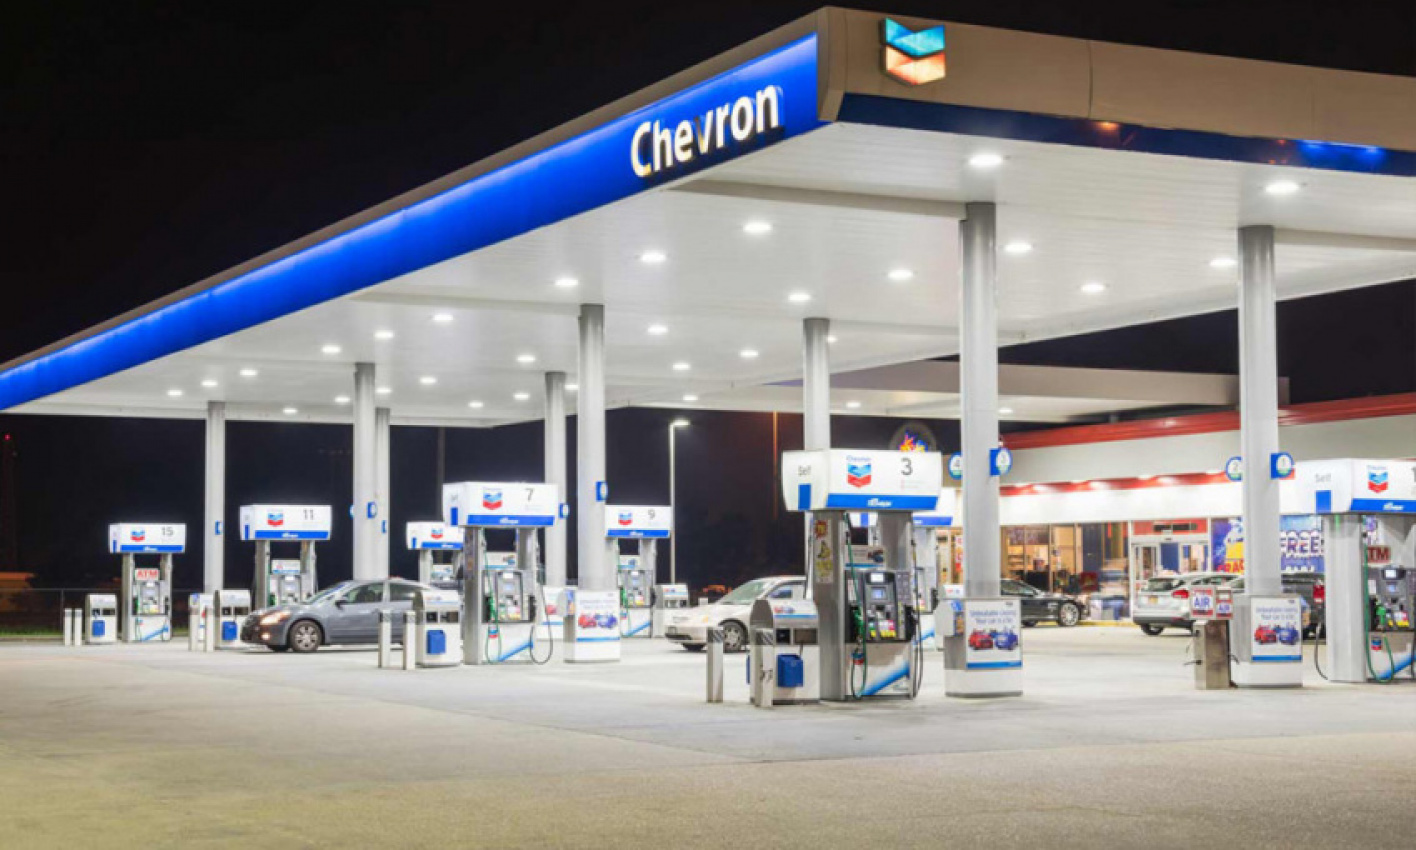 autos, cars, industry news, chevron, diesel, fuel, fuel price hike, industry news, petrol, petrol station, texas, thief, texan thieves discreetly steal 1,000 gallons of diesel from petrol station